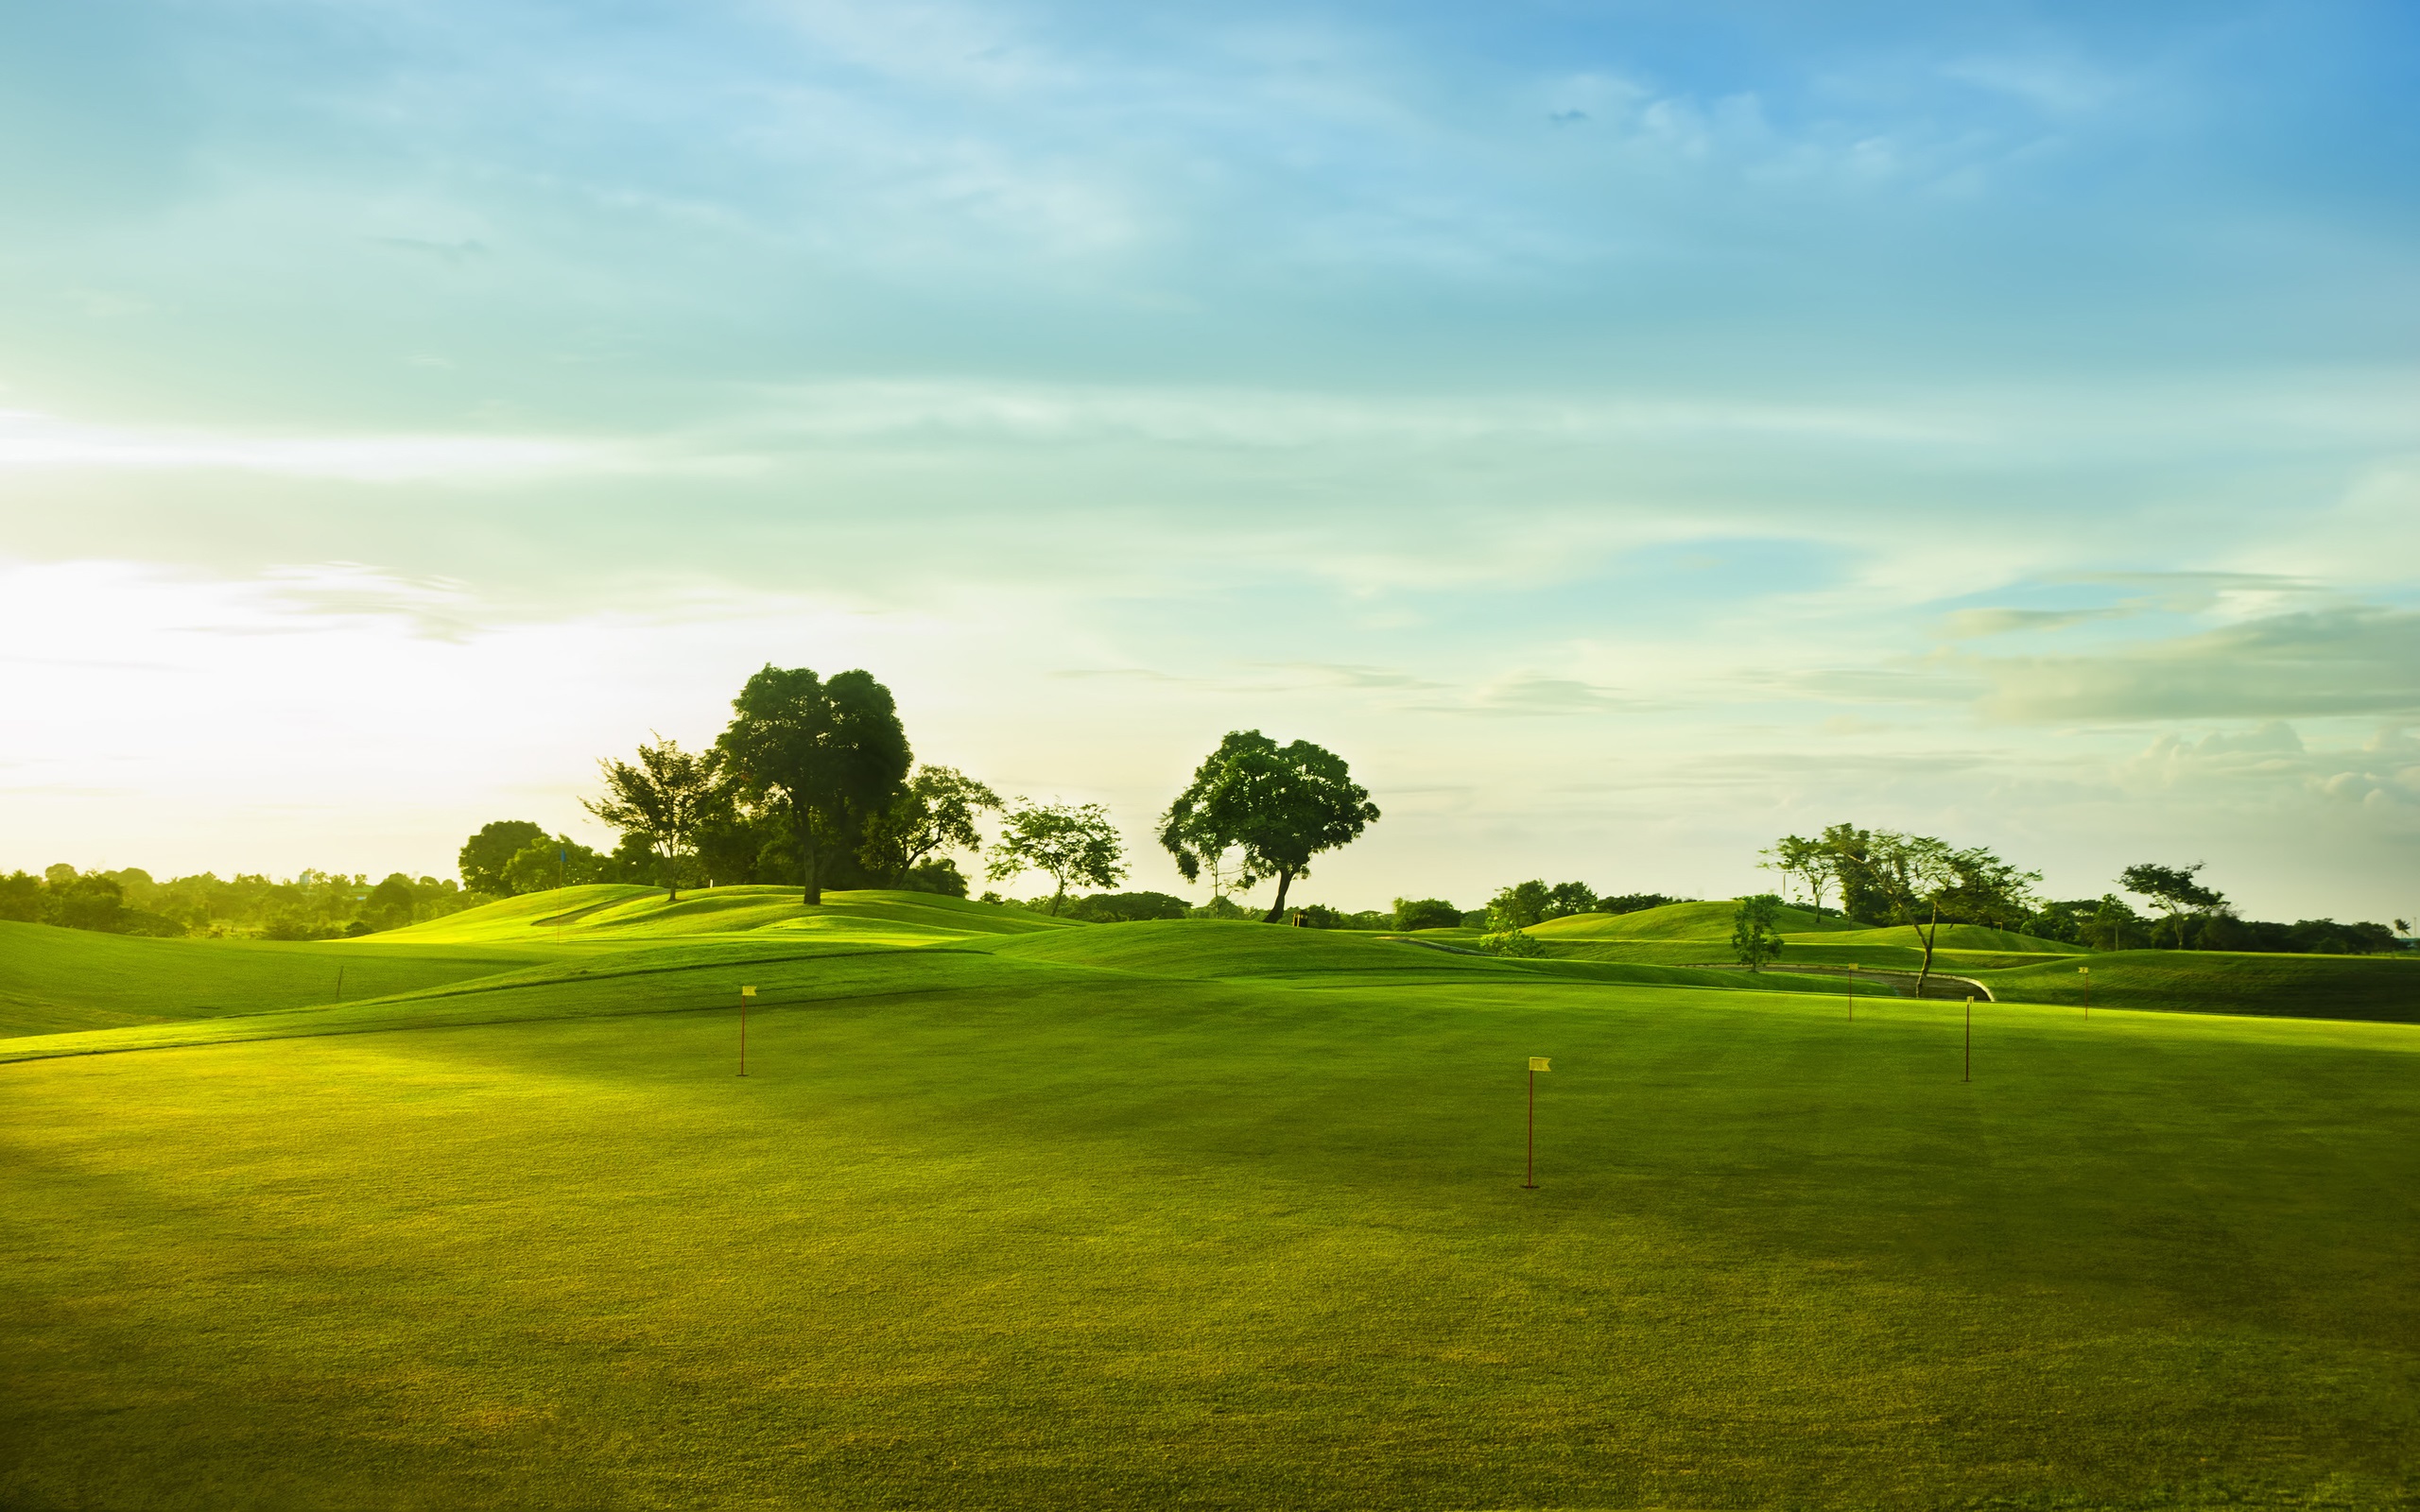 Golf course, green grass, trees wallpaper | nature and landscape